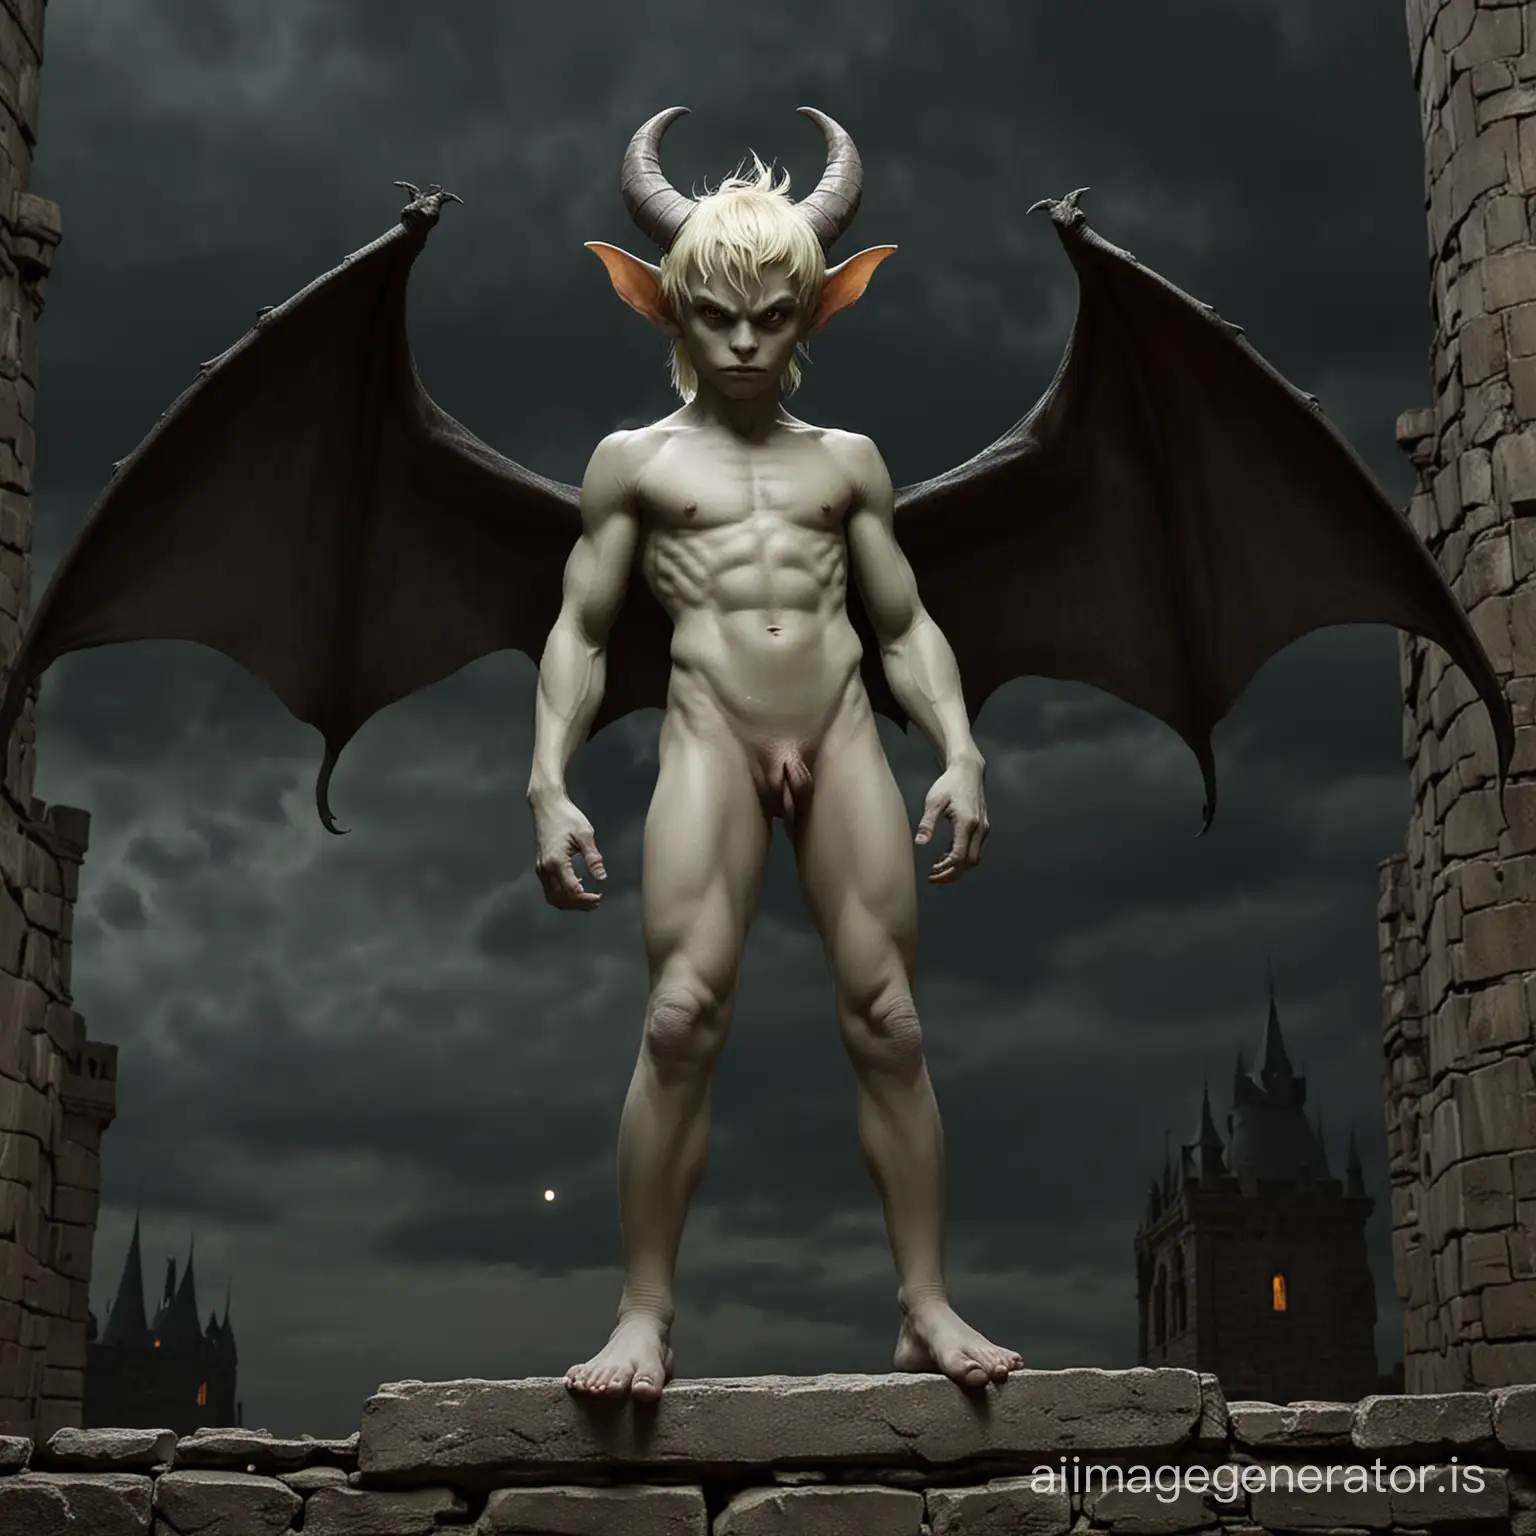 It’s Night. We see a nude demon-boy with humanoid proportions, a large tail and very smooth gray-green skin and some freckles. He has natural bat-like wings and a Tail. rly a tail!  He has pointed ears. He has blonde hair. He has claws instead of fingers and toes. He has animal-like feet. Two small horns without any structure growing from the boy's forehead. He stands on an old castle in a dark cloudy Night. Show the entire boy in a long shot.  Show the entire boy in a long shot.  He wears a bulgy speedo